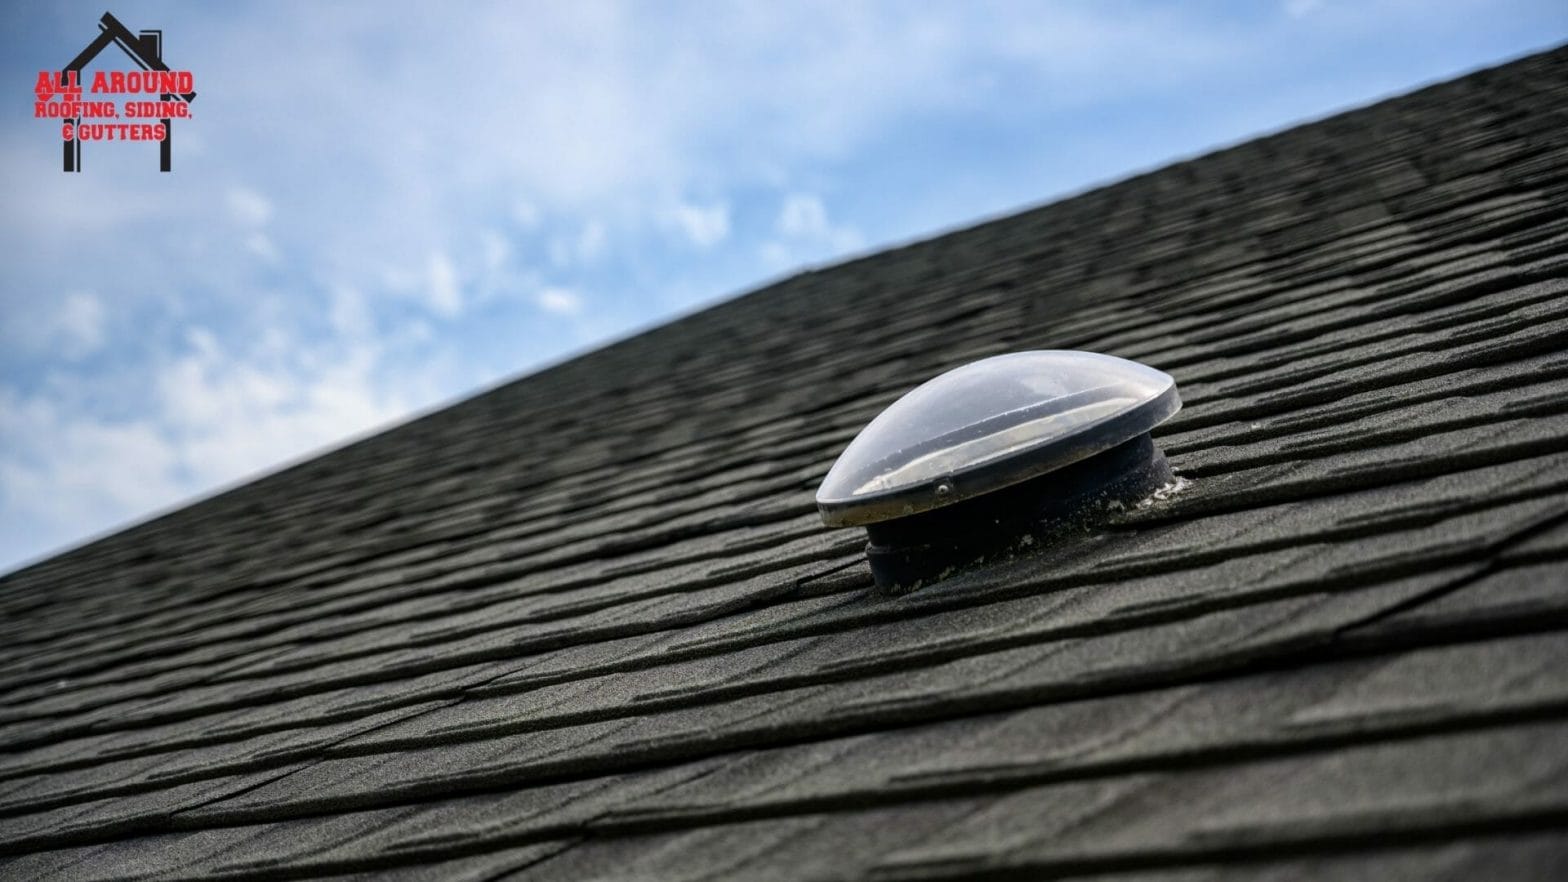 FAQs About Asphalt Shingle Roof: Maintenance, Ratings, Costs